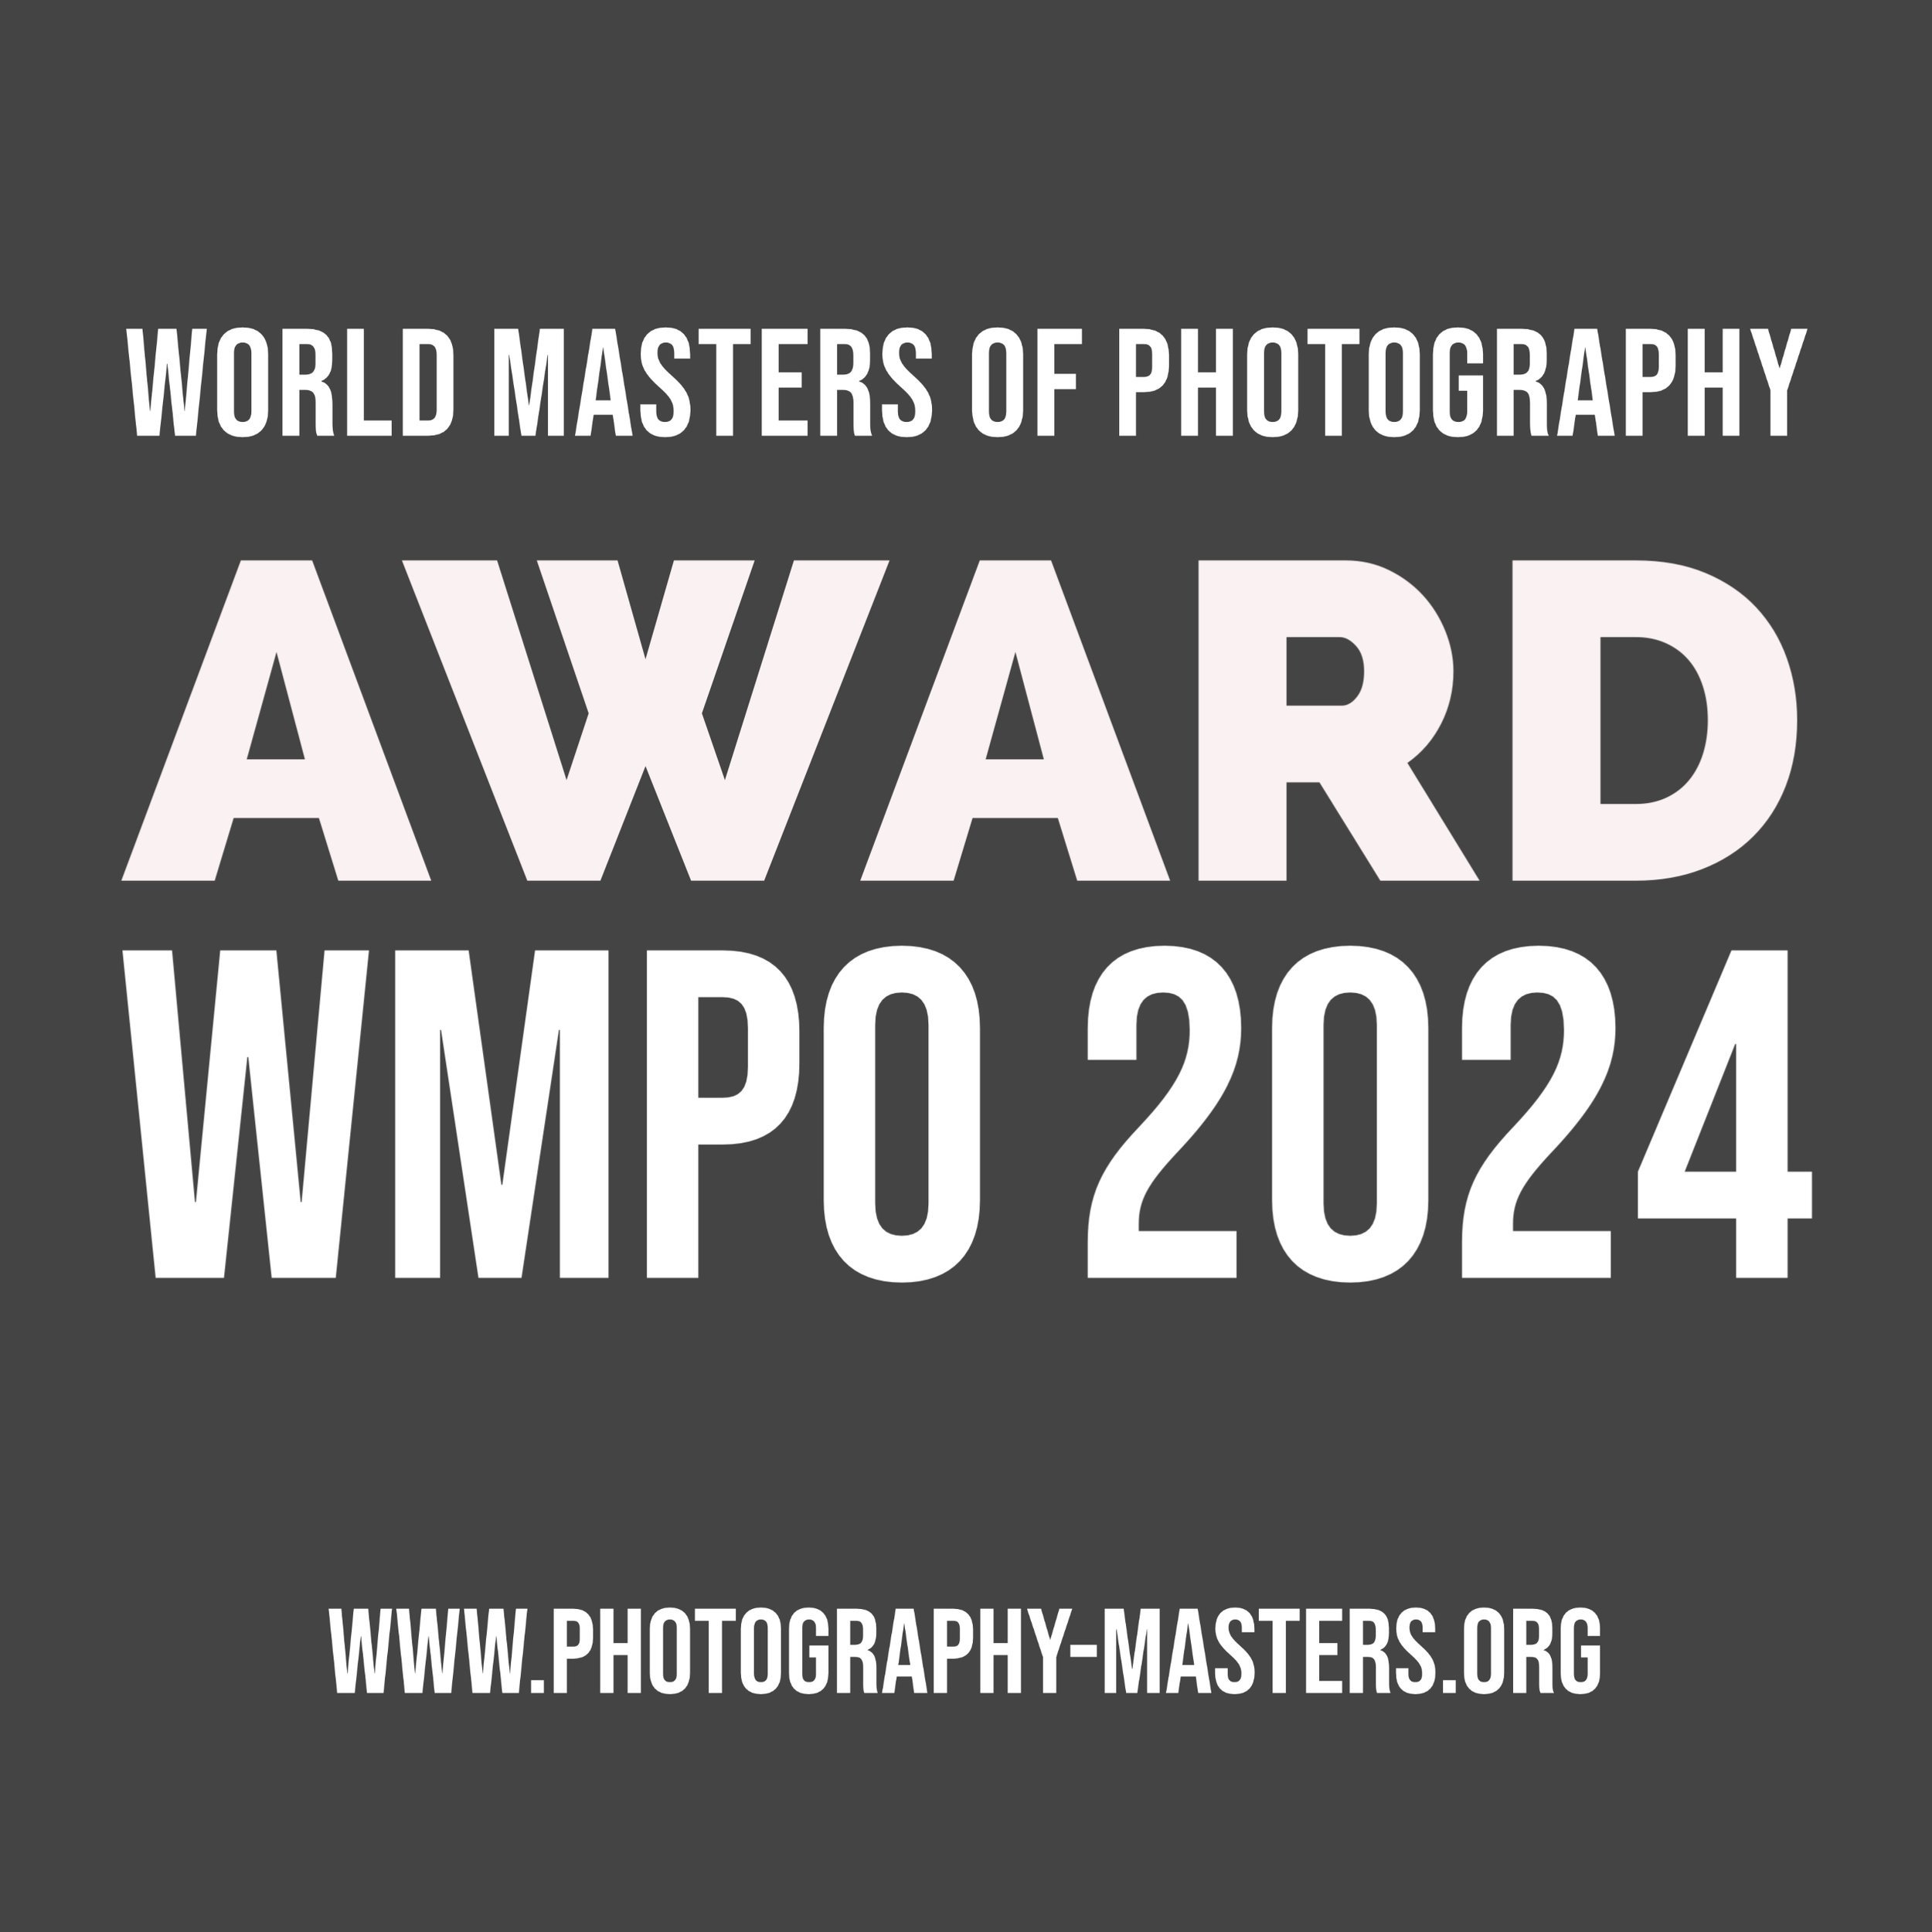 World Masters of Photography